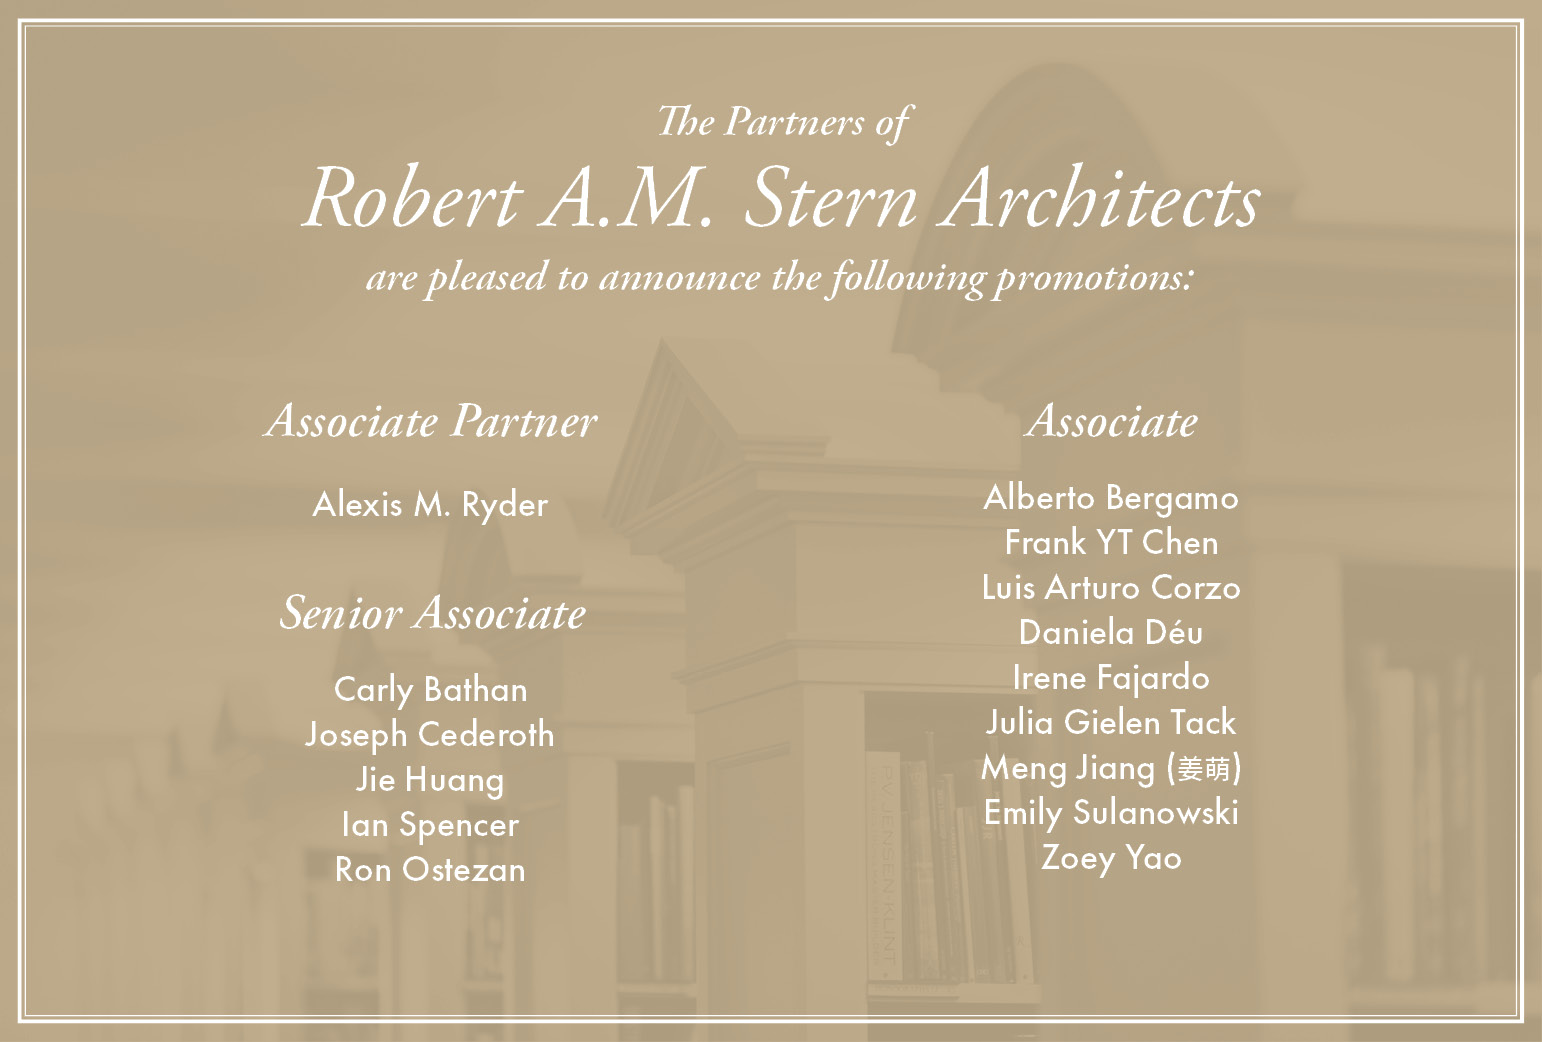  Robert A.M. Stern Architects Announces New Promotions